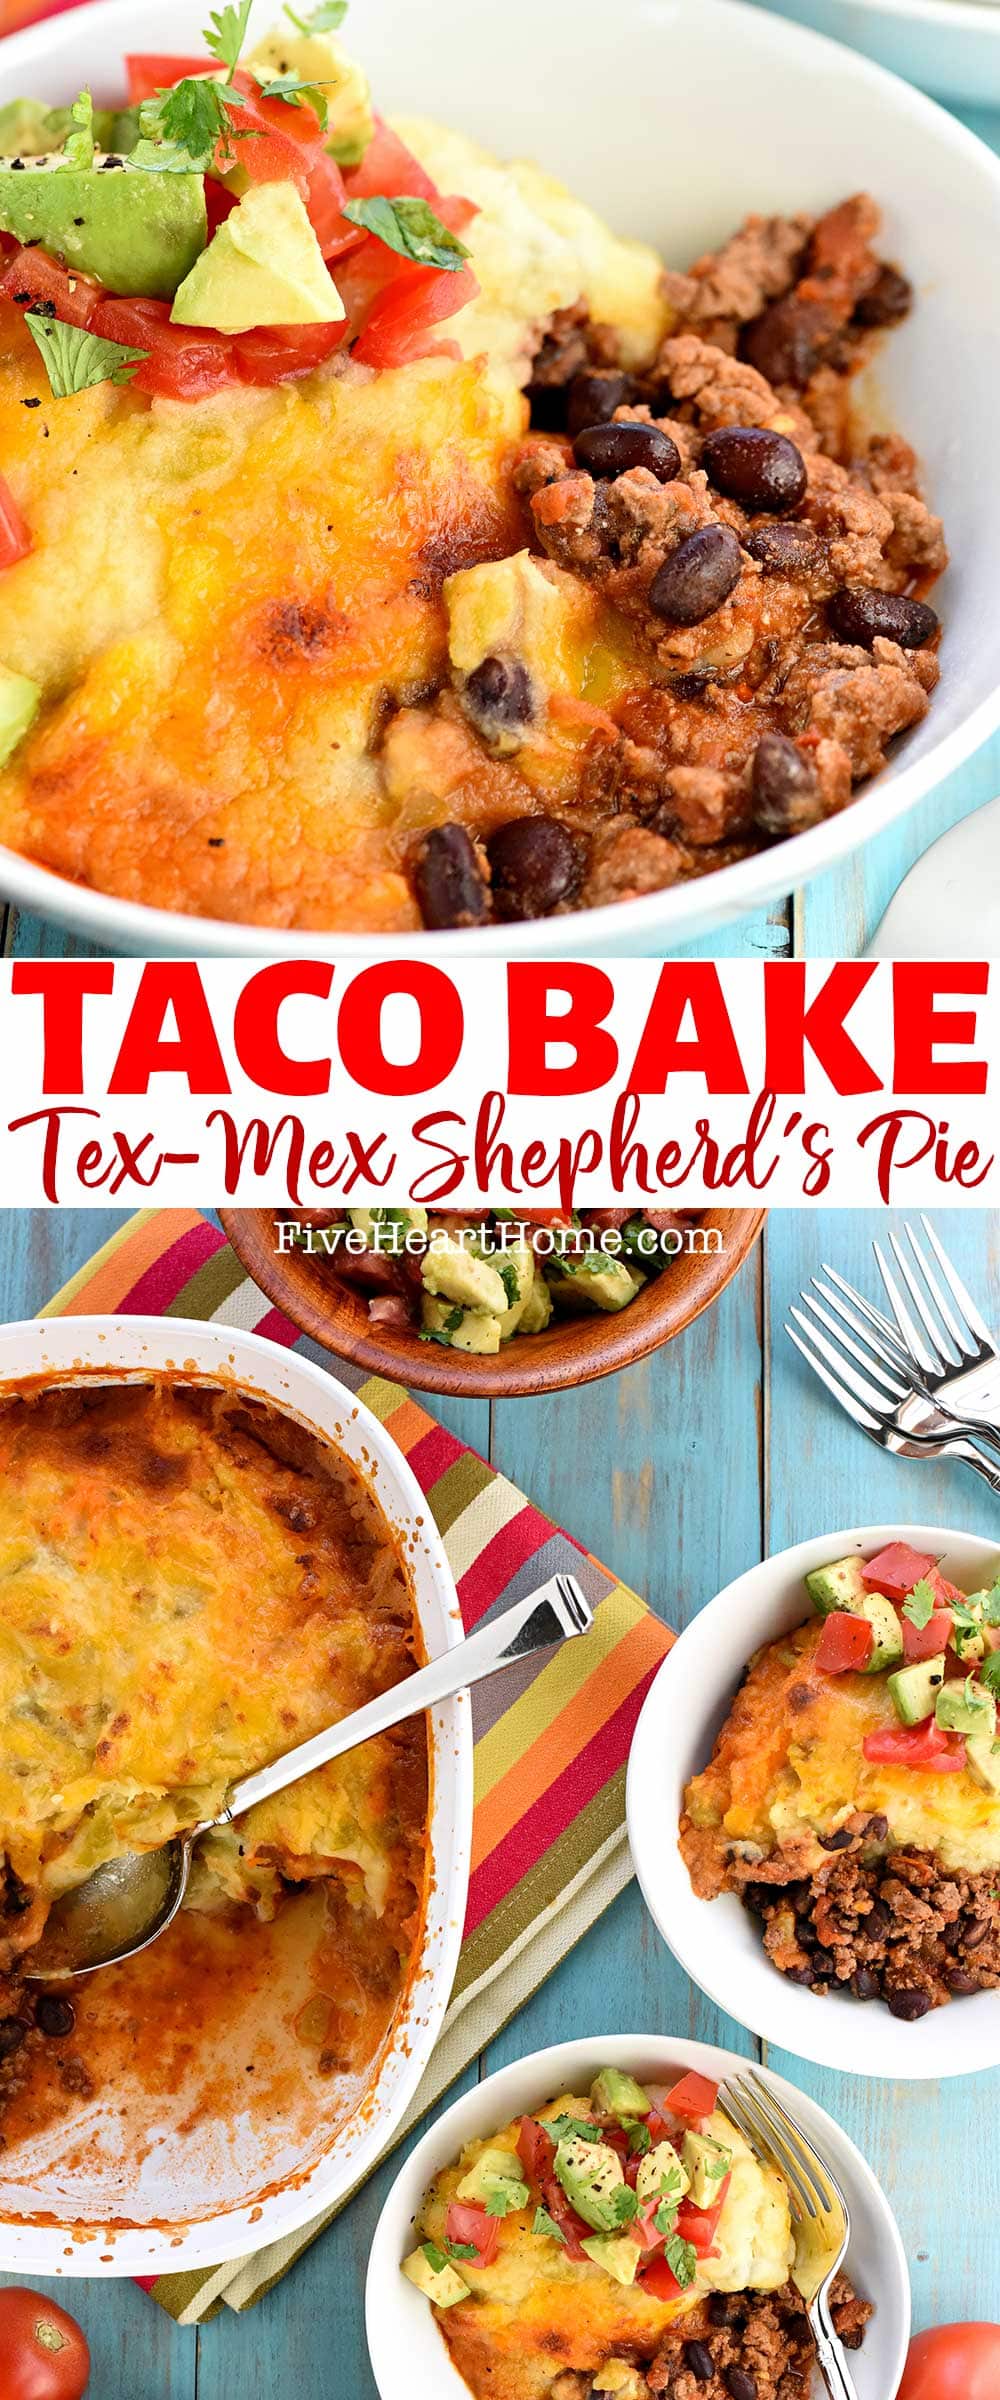 Taco Bake ~ this recipe puts a Tex-Mex twist on the comfort food classic shepherd's pie with seasoned ground beef and black beans topped with cheesy green chile mashed potatoes and a refreshing avocado tomato salad! | FiveHeartHome.com via @fivehearthome